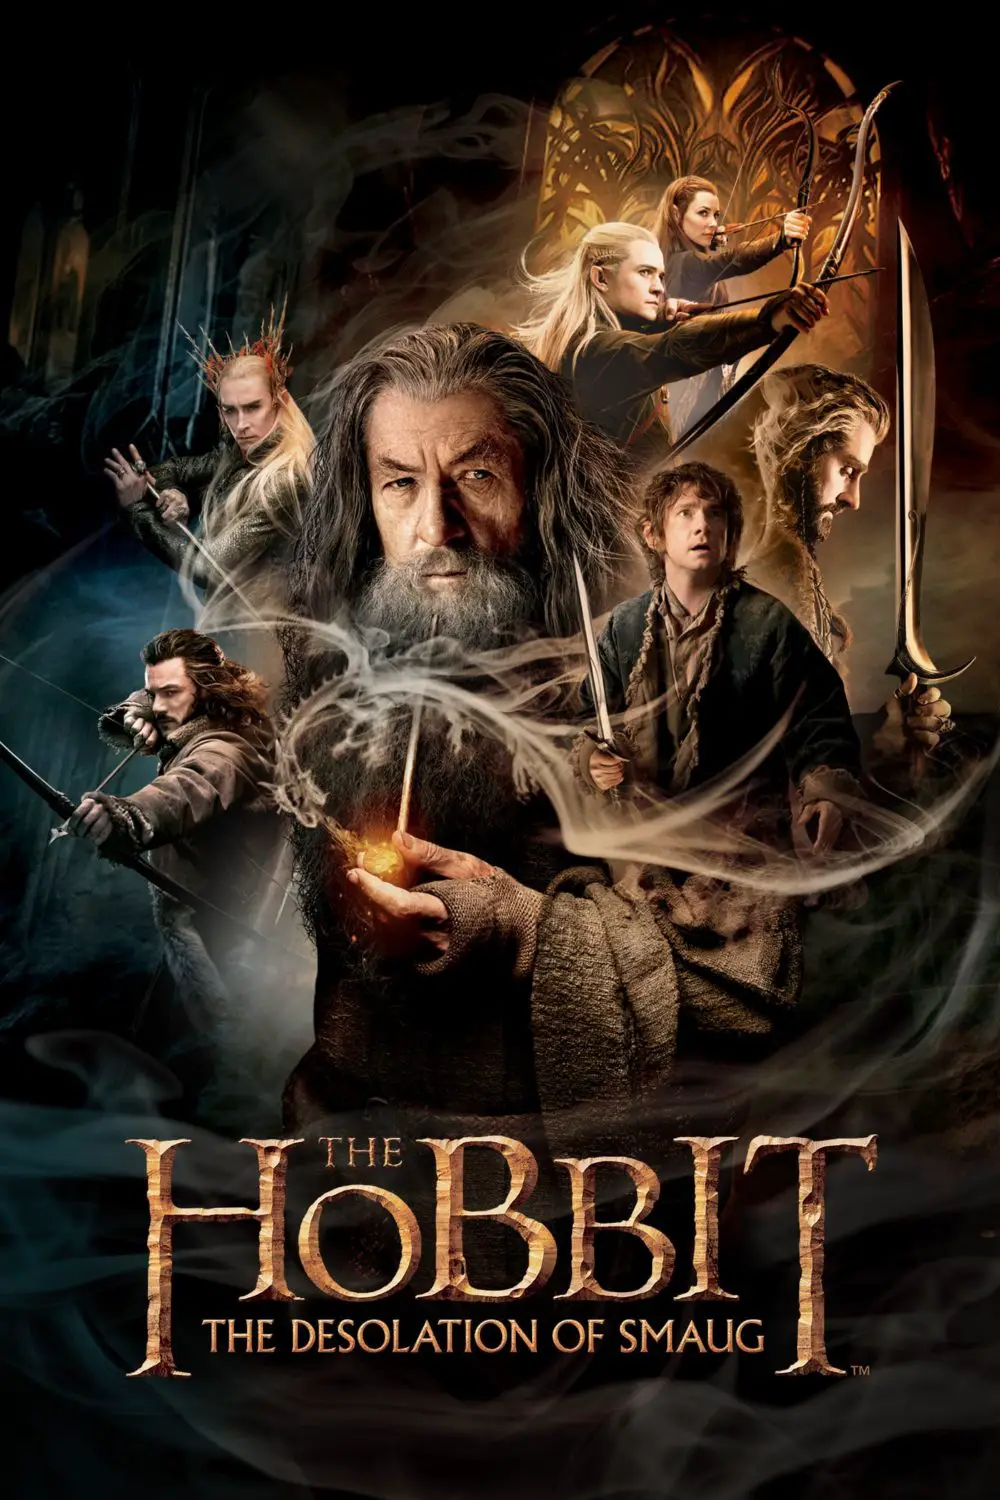 You are currently viewing The Hobbit: The Desolation of Smaug